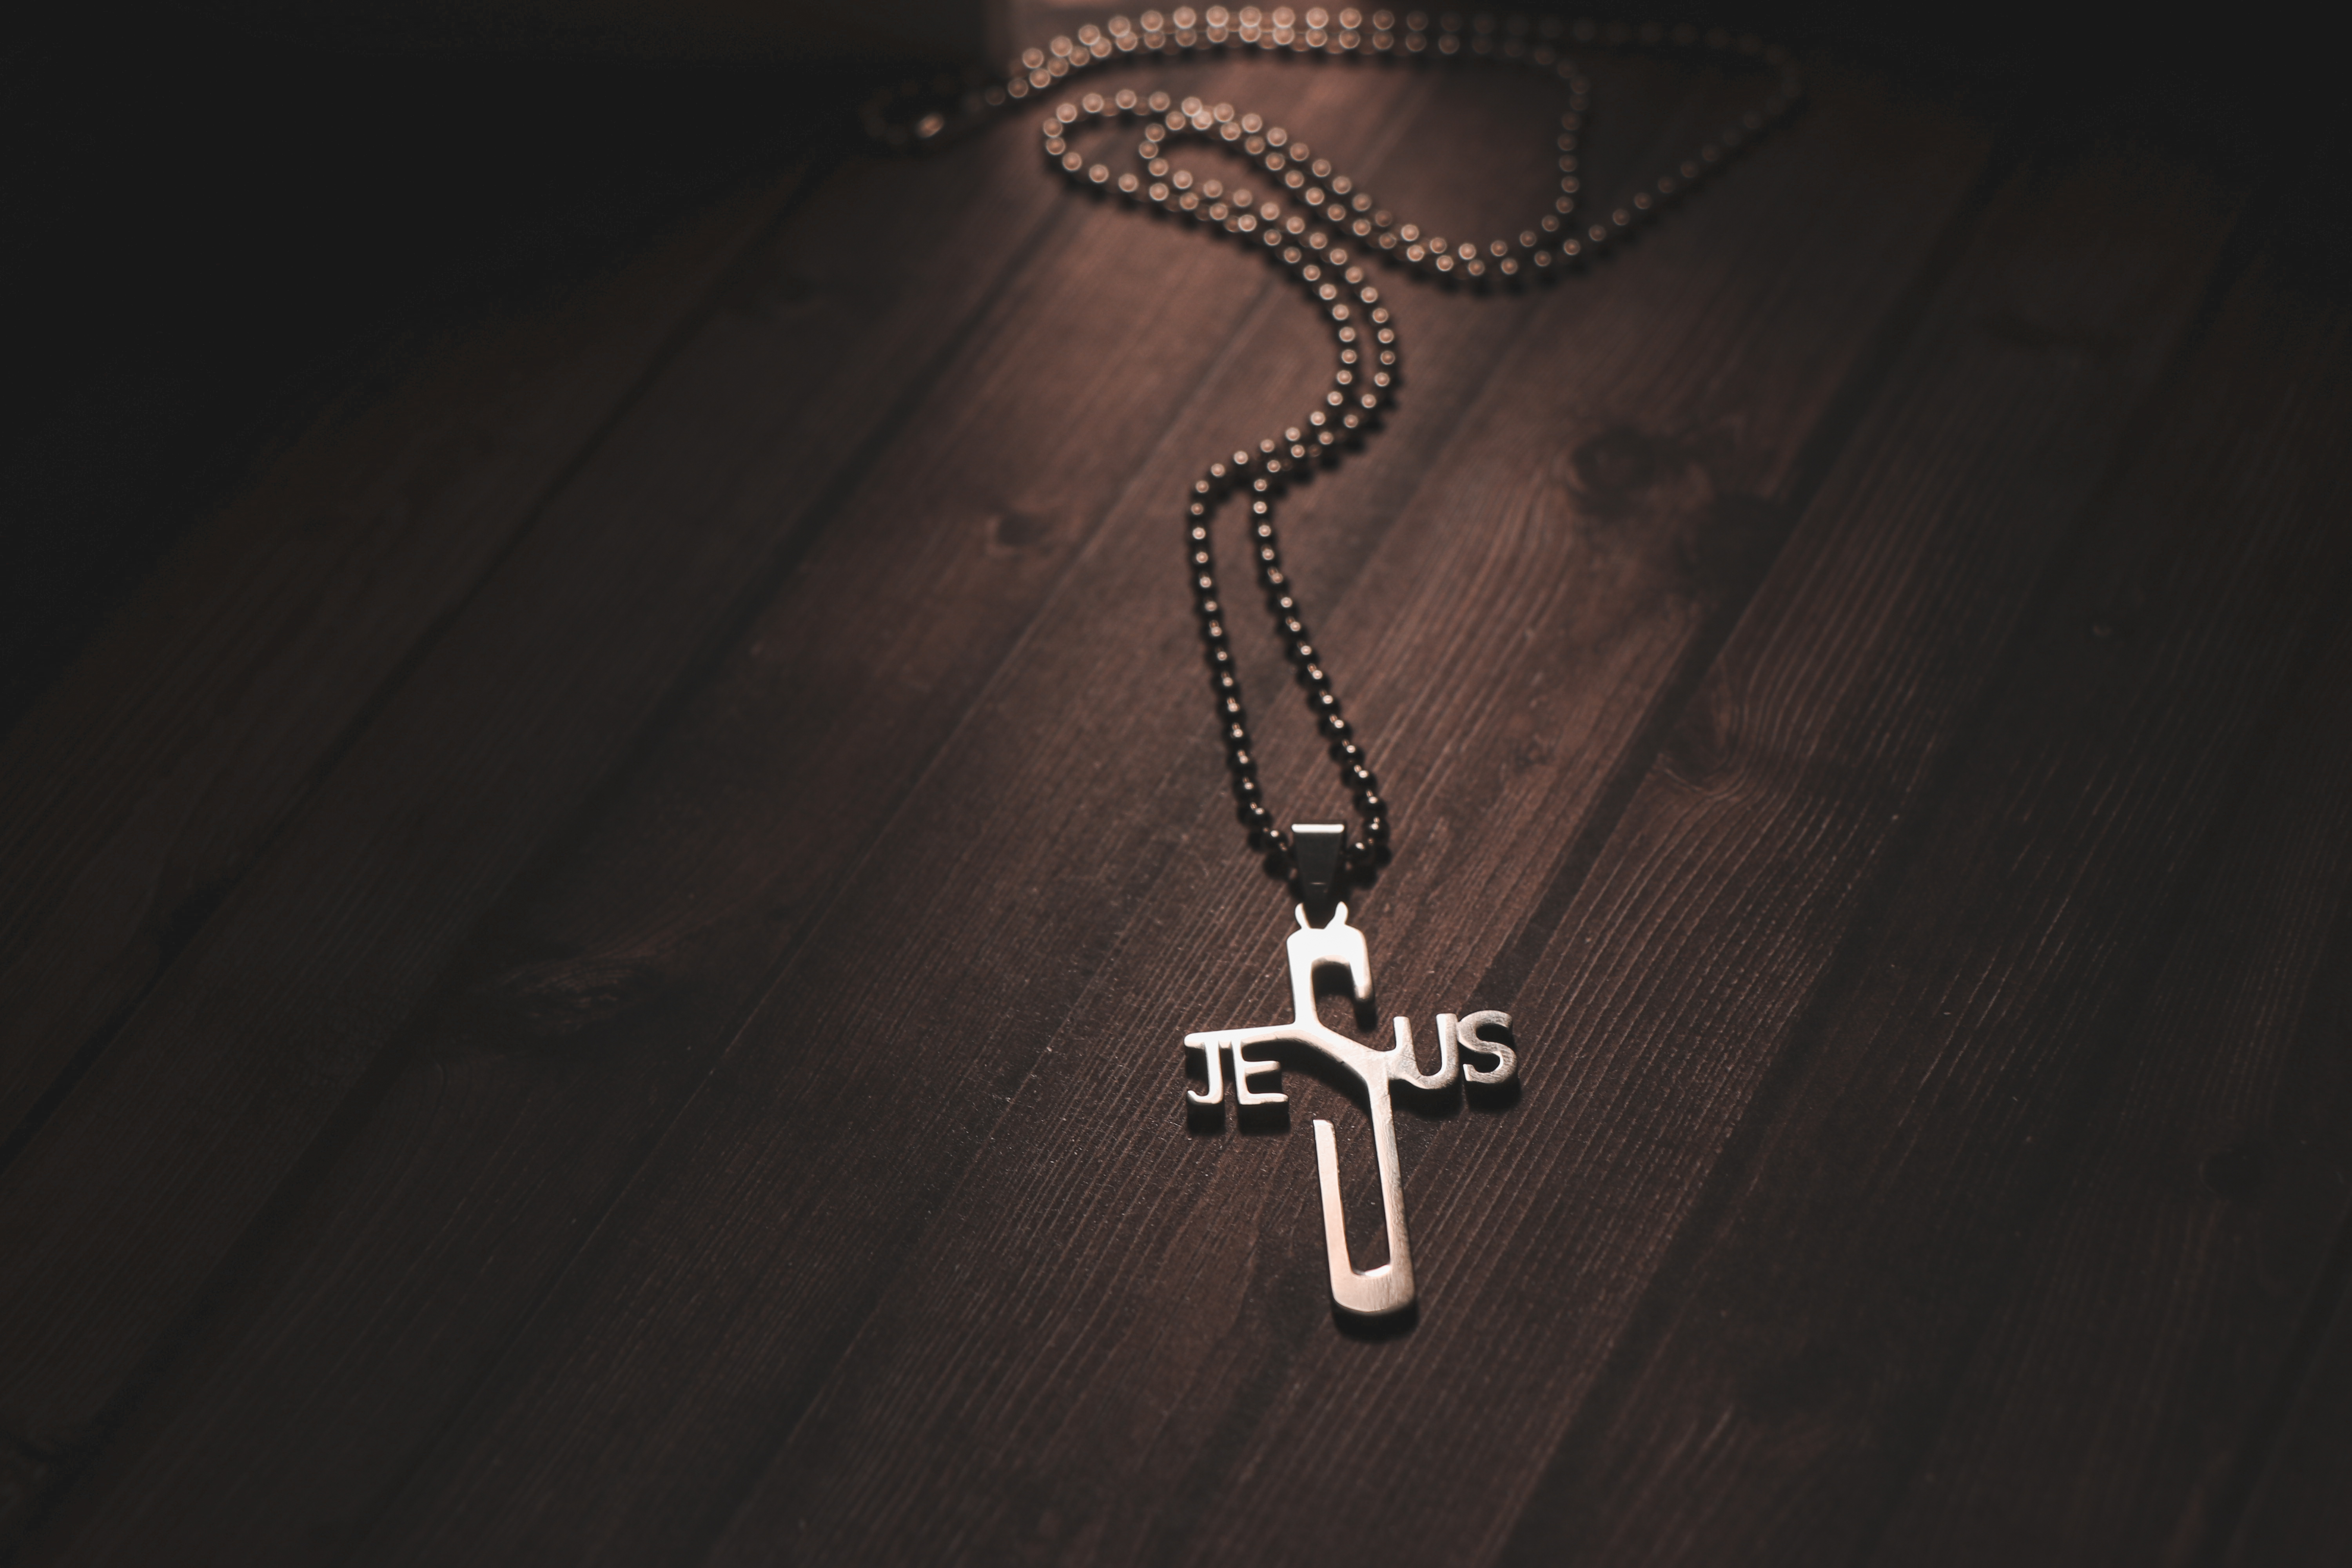 Necklace with Cross Pendant on Wooden Table · Free